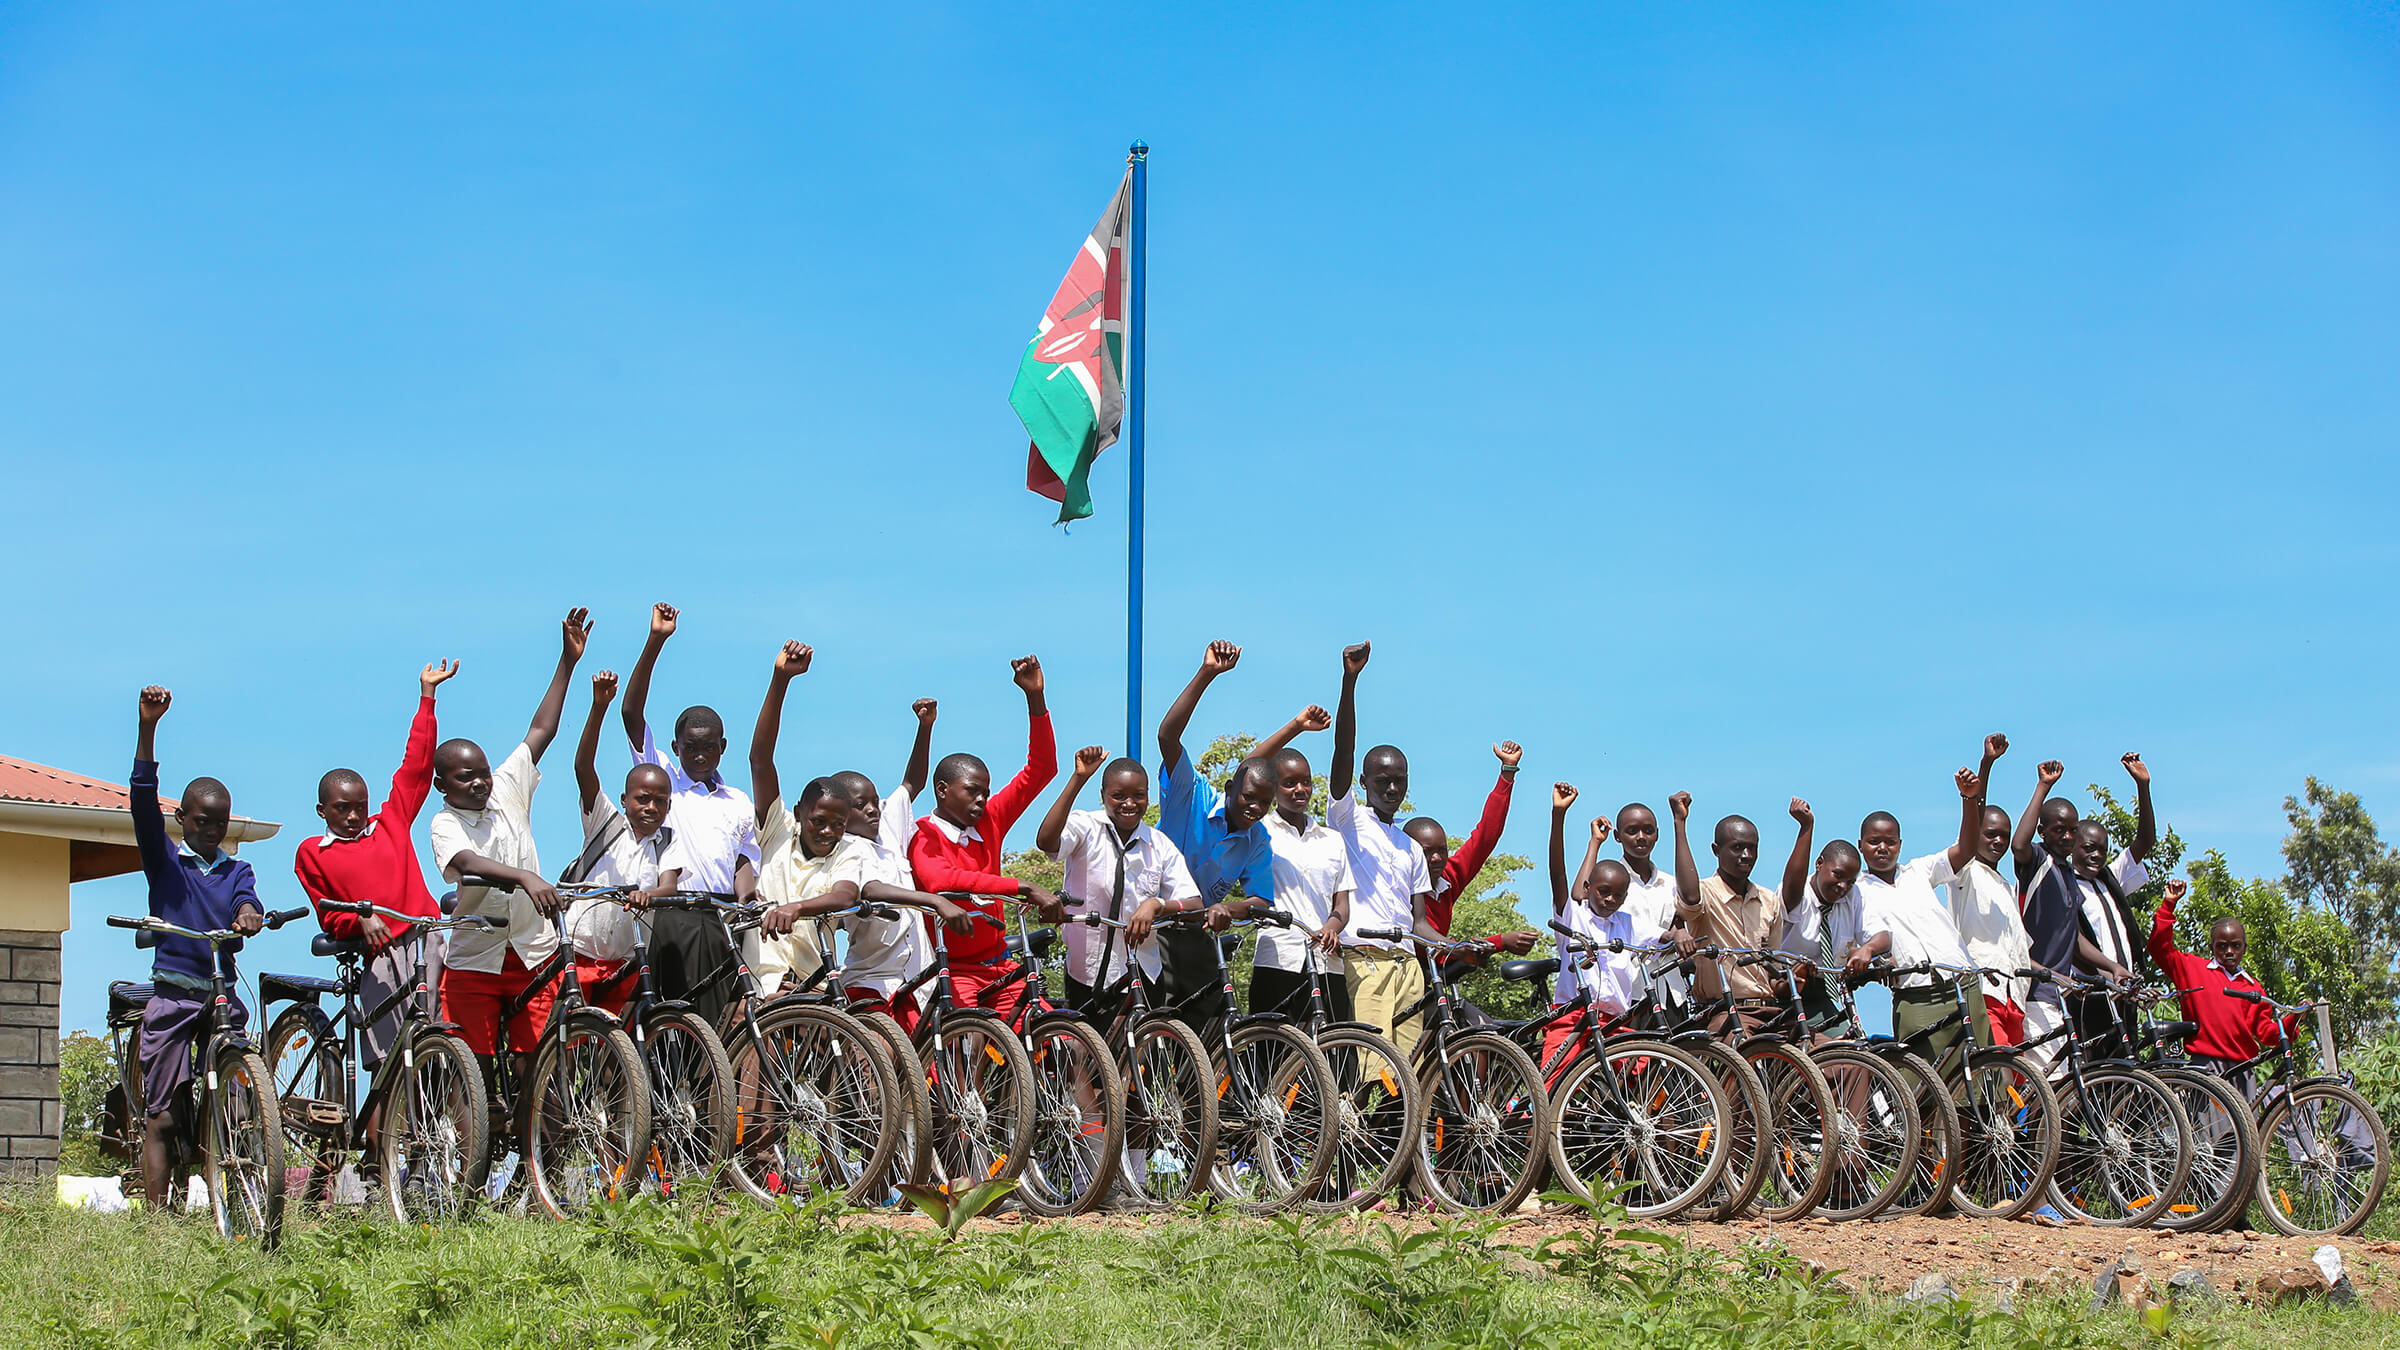 Students in Kenya line up with their new bikes donated by One Bicycle.